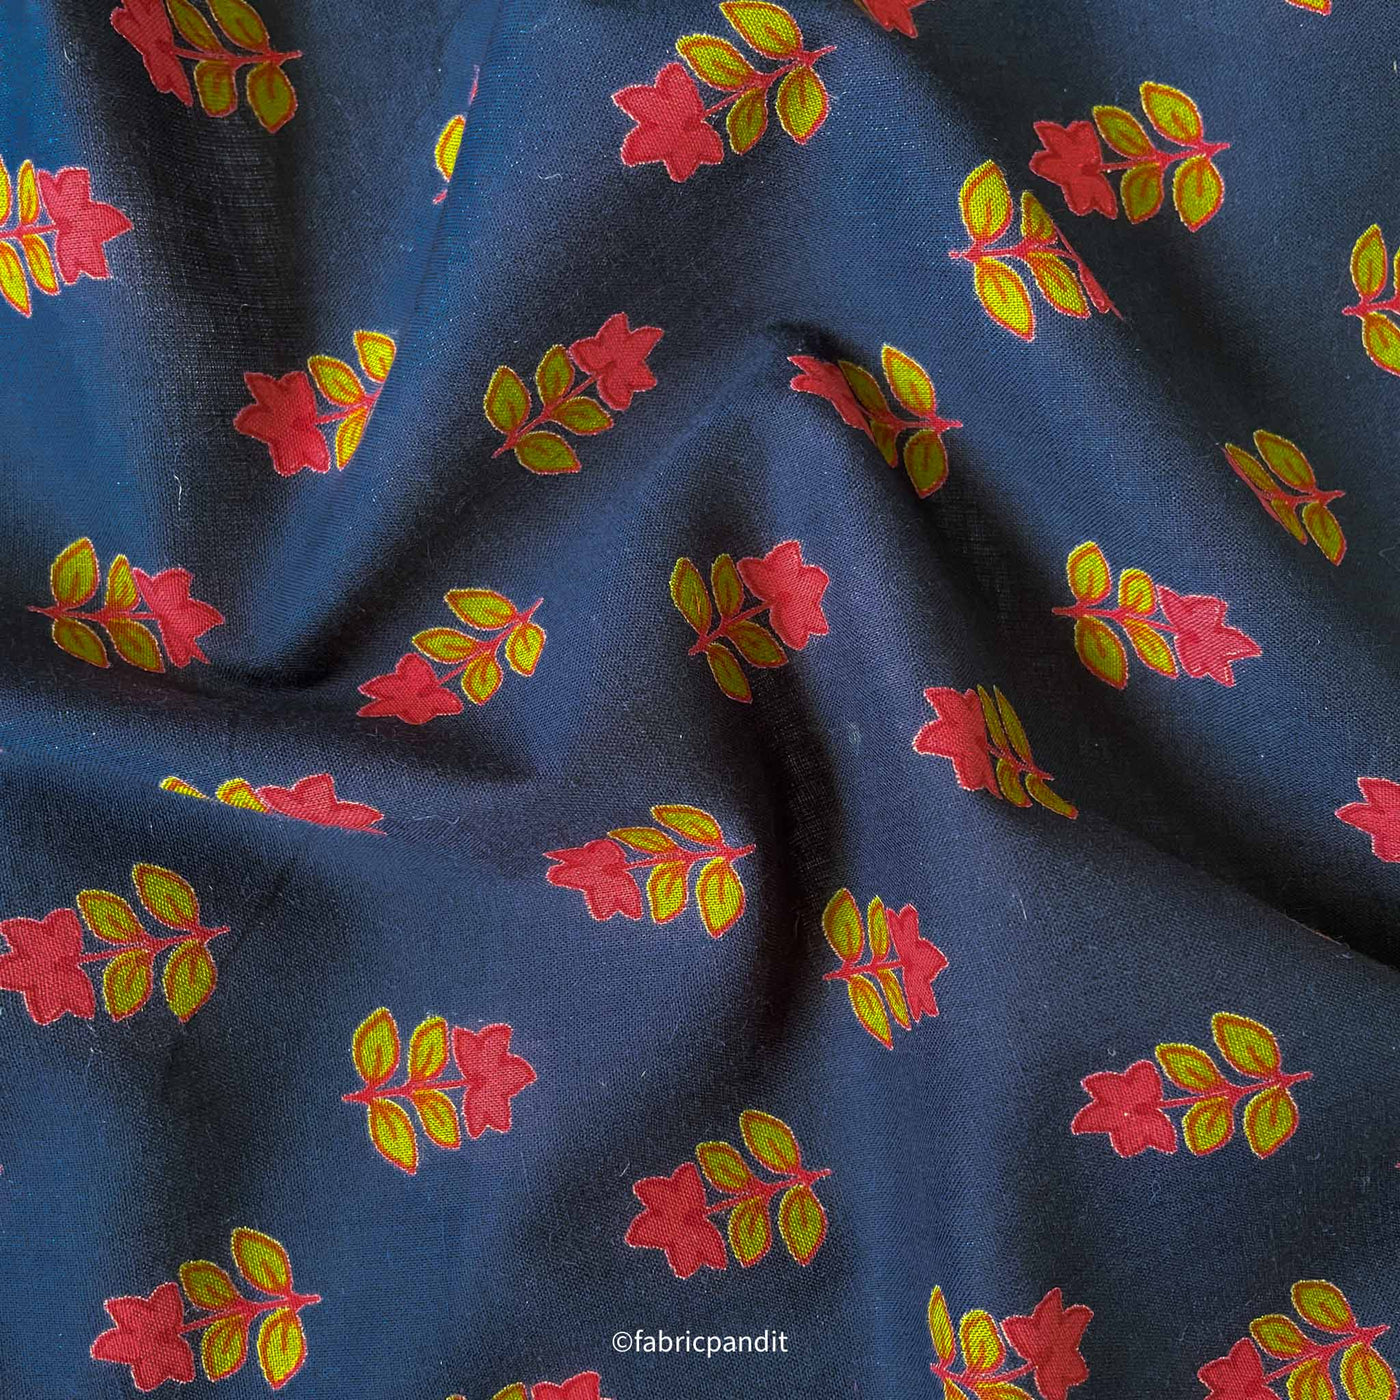 Fabric Pandit Fabric Deep Blue and Peach Star Flower Hand Block Printed Pure Cotton Fabric (Width 42 Inches)